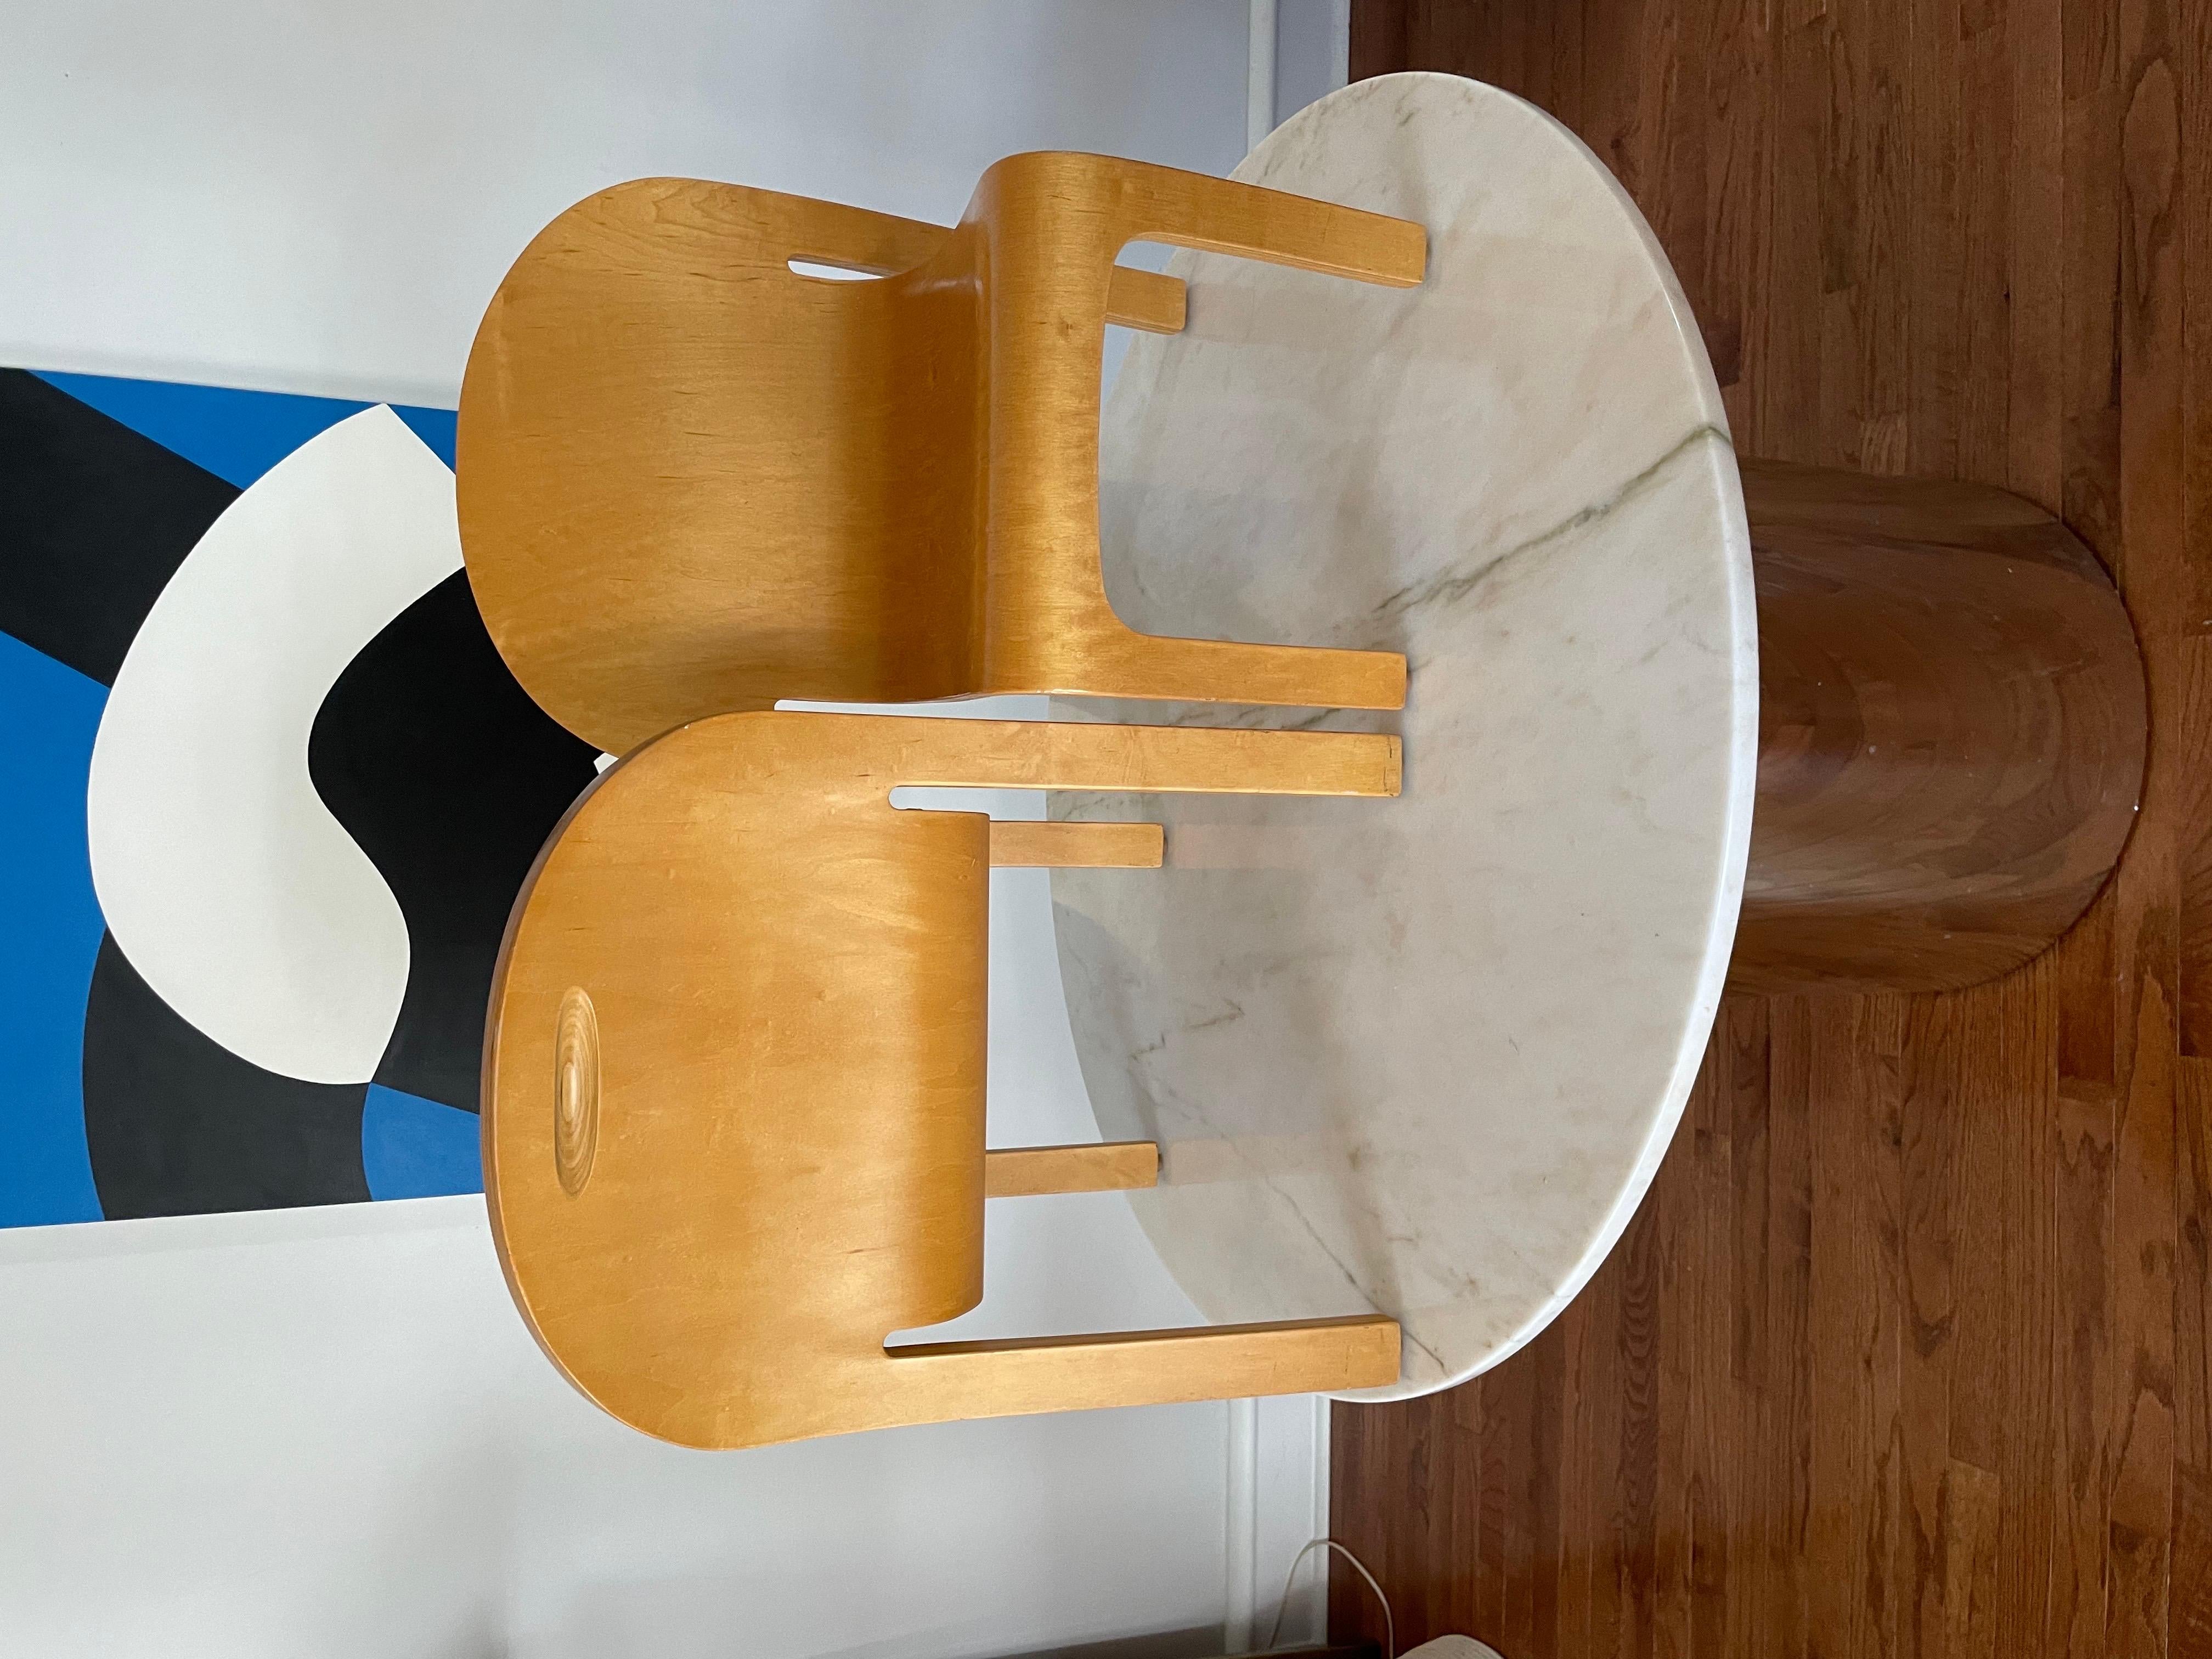 Plywood Children's Bodyform Chairs by Peter Danko, 1980s, American For Sale